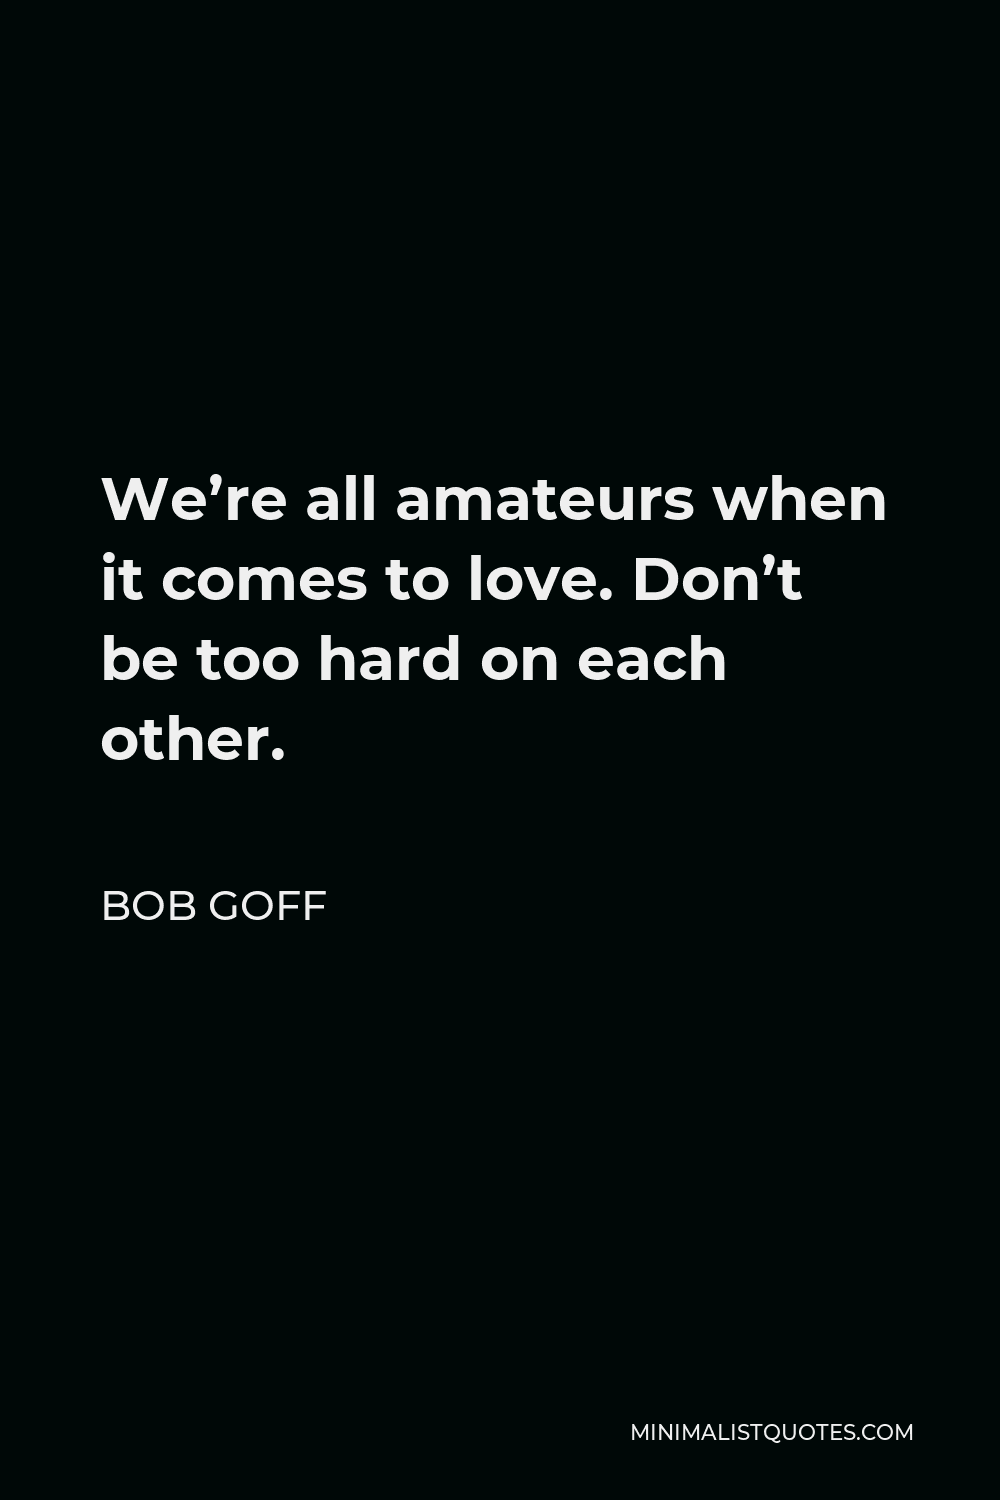 Bob Goff Quote - We’re all amateurs when it comes to love. Don’t be too hard on each other.